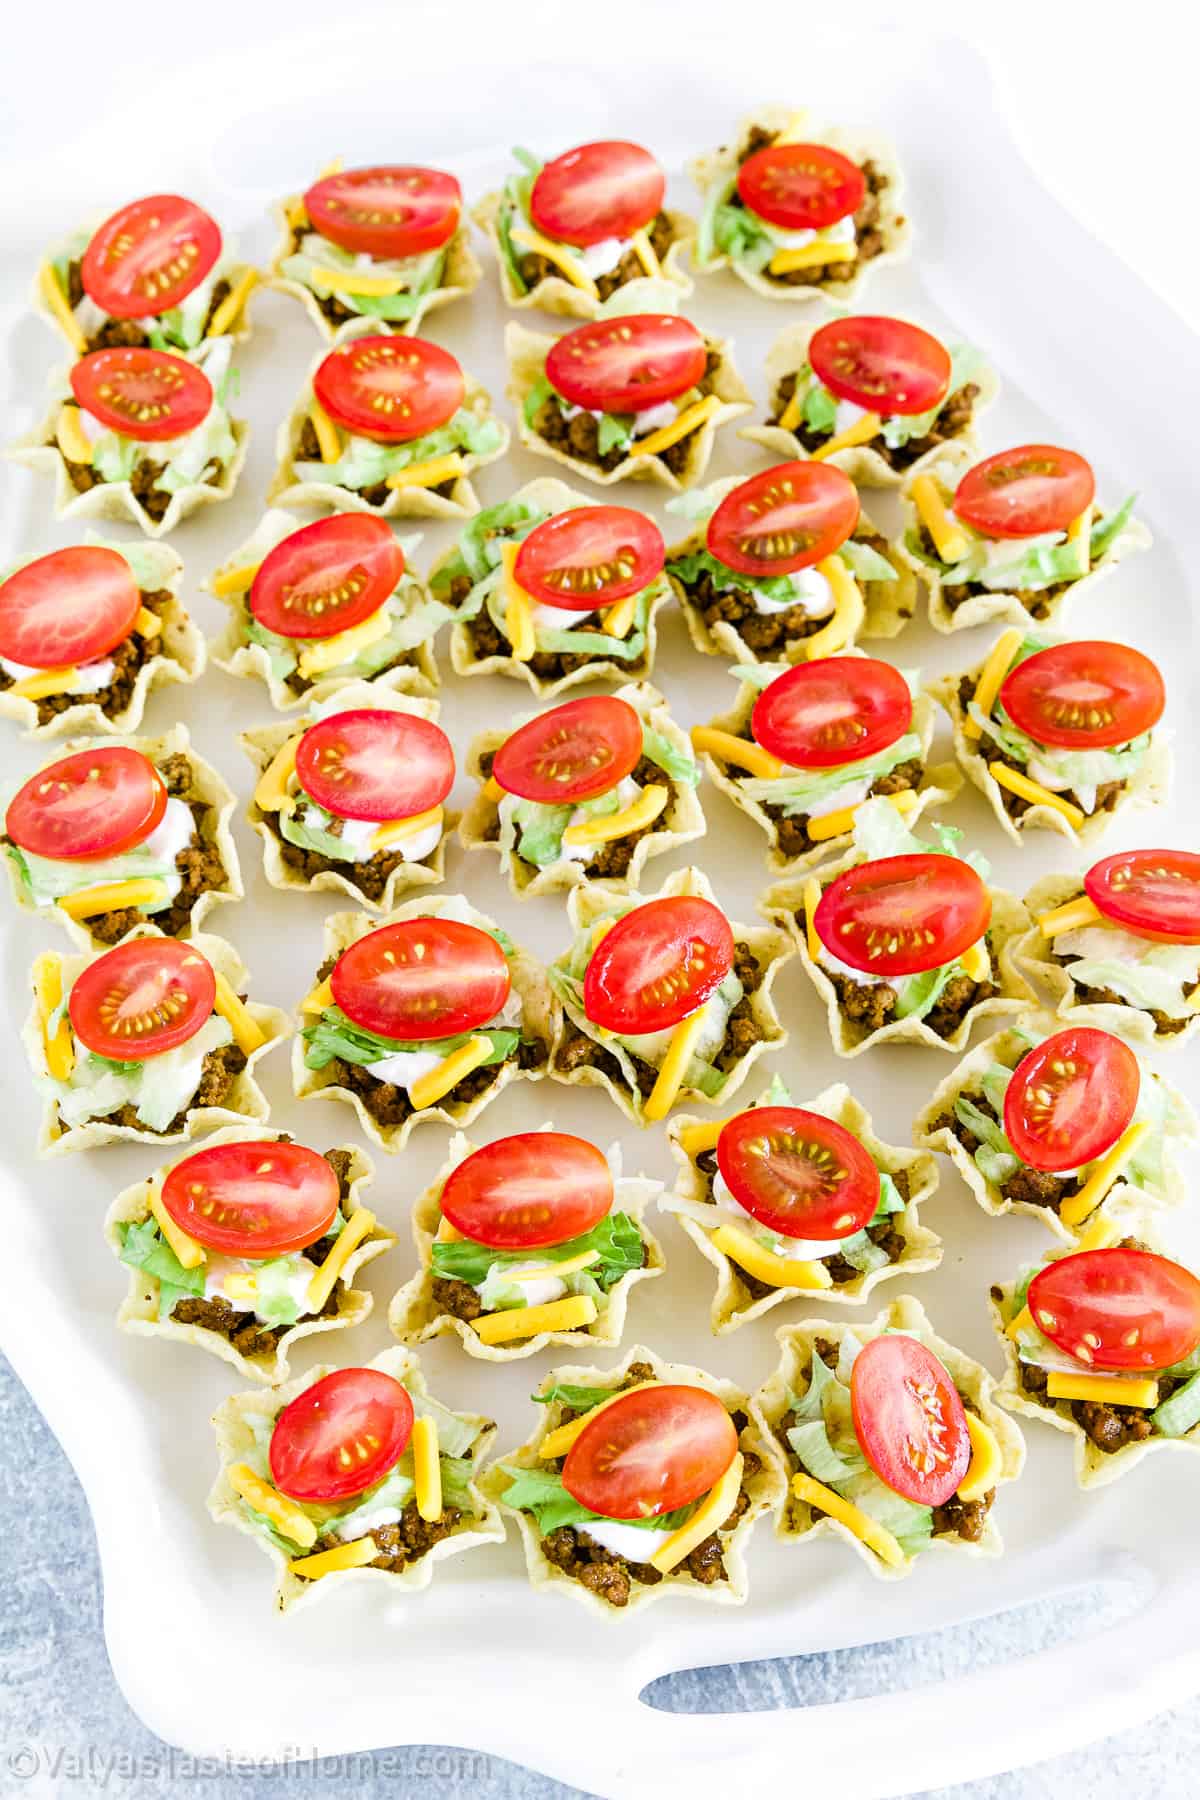 What’s a great party snack that everyone will love? This taco bites appetizer recipe is quick, easy, customizable, and a hit with any crowd and especially kids!